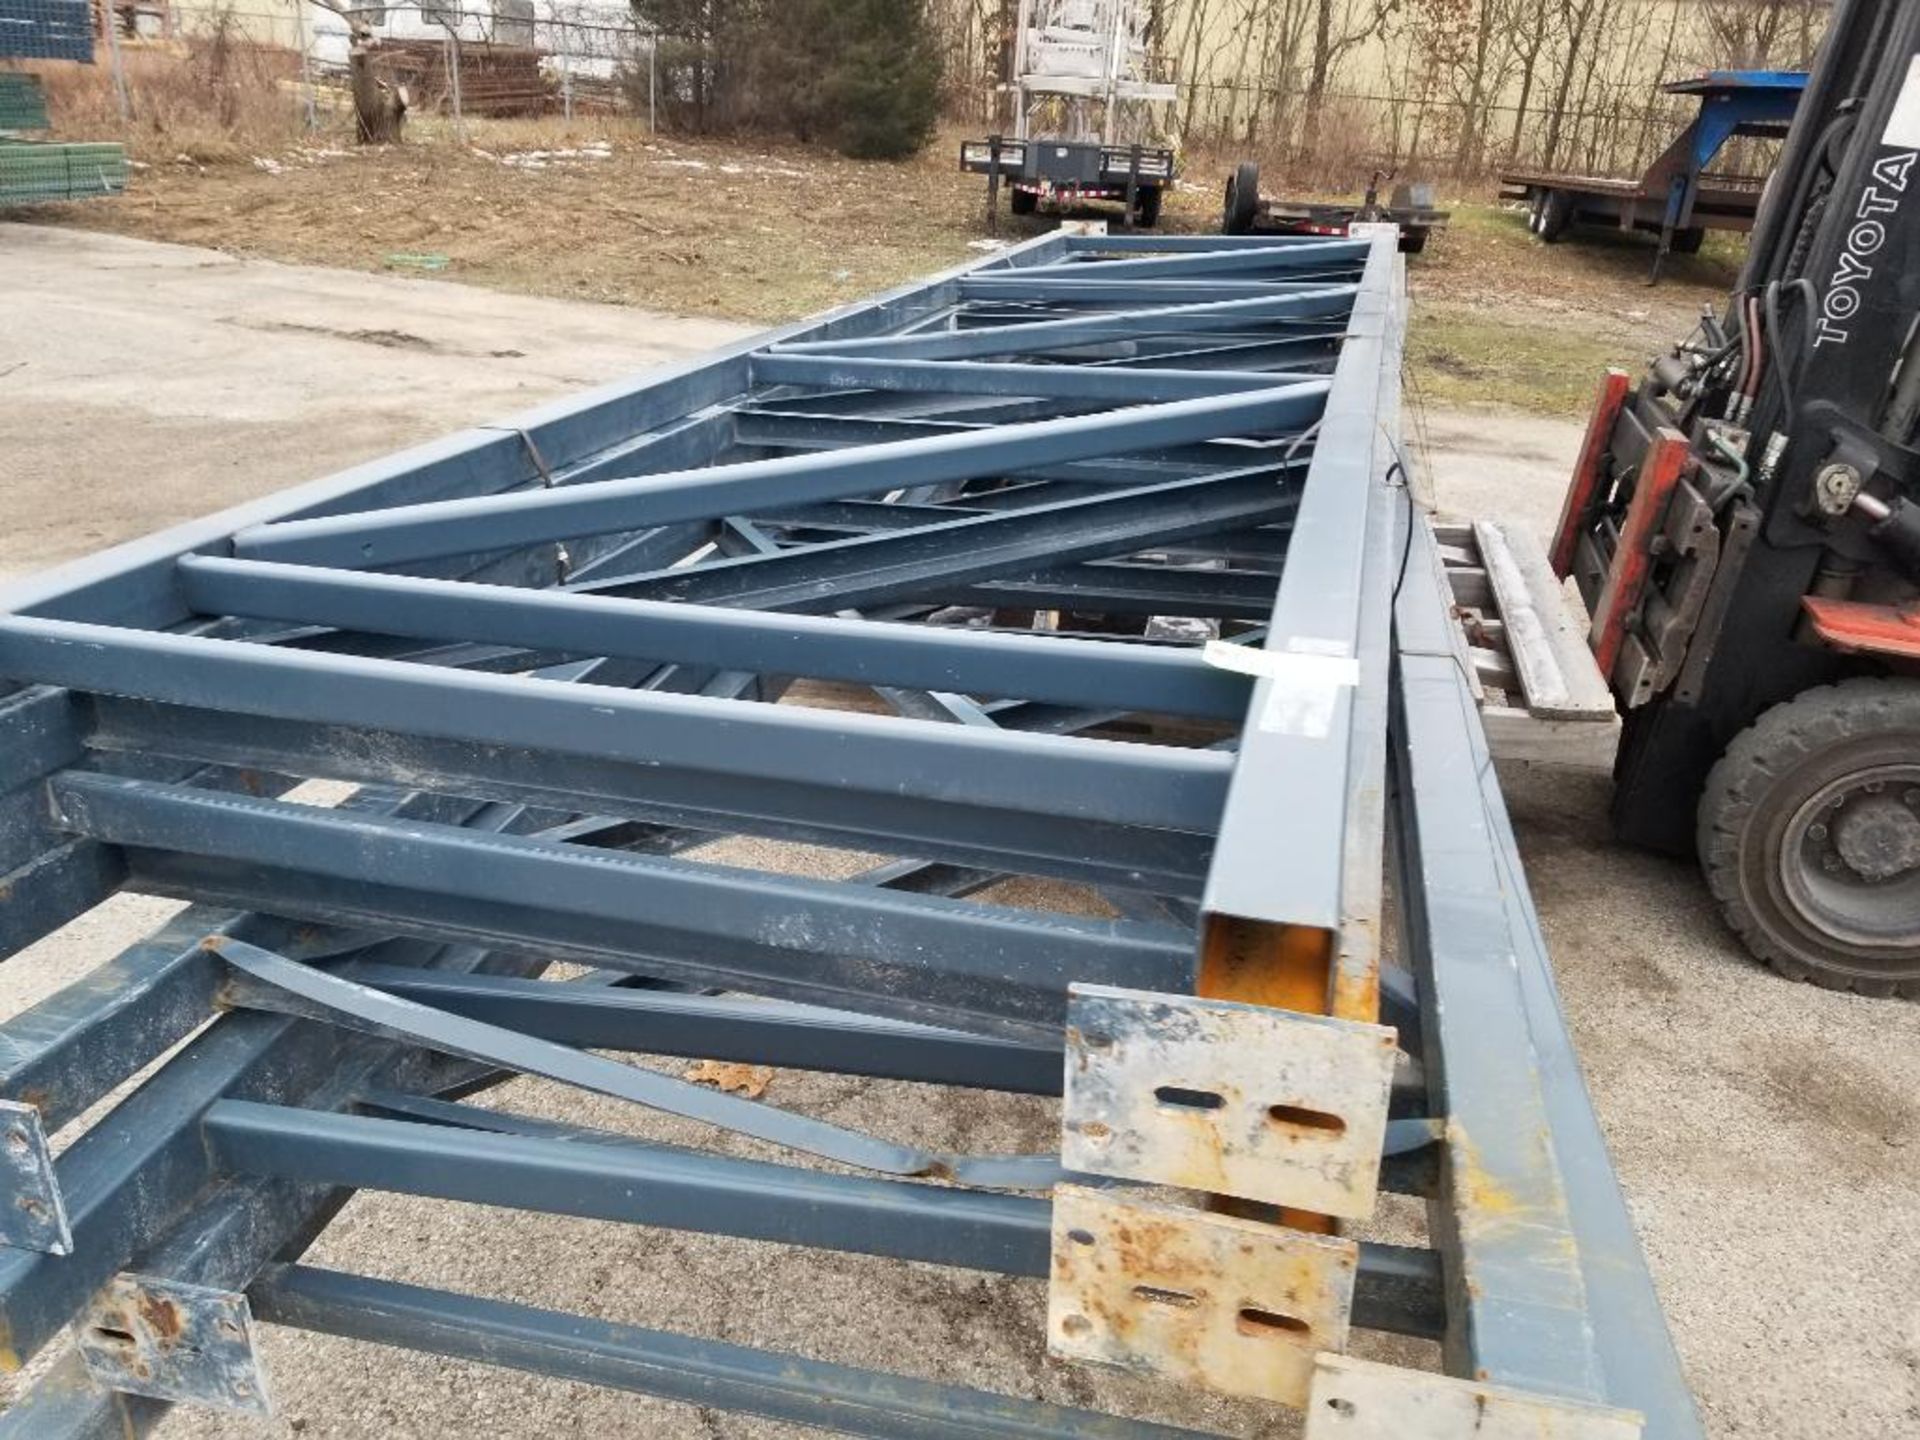 Qty 8 - Pallet racking uprights. 210in tall x 49in wide. - Image 2 of 7